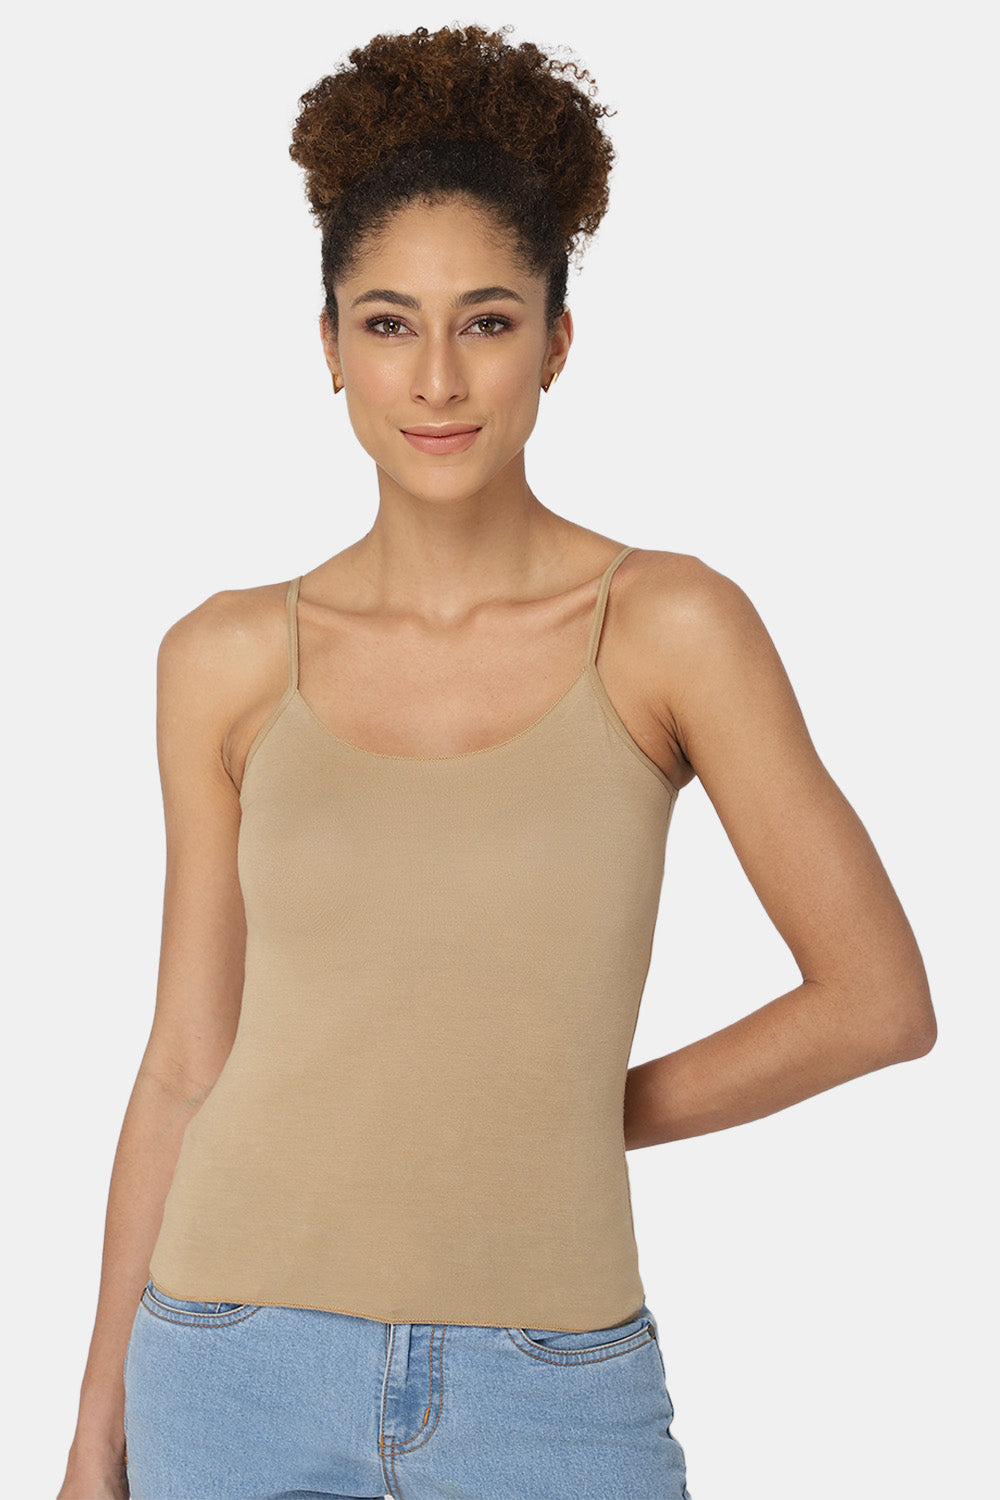 Intimacy Camisole-Slip Special Combo Pack - In08 - Pack of 3 - C66